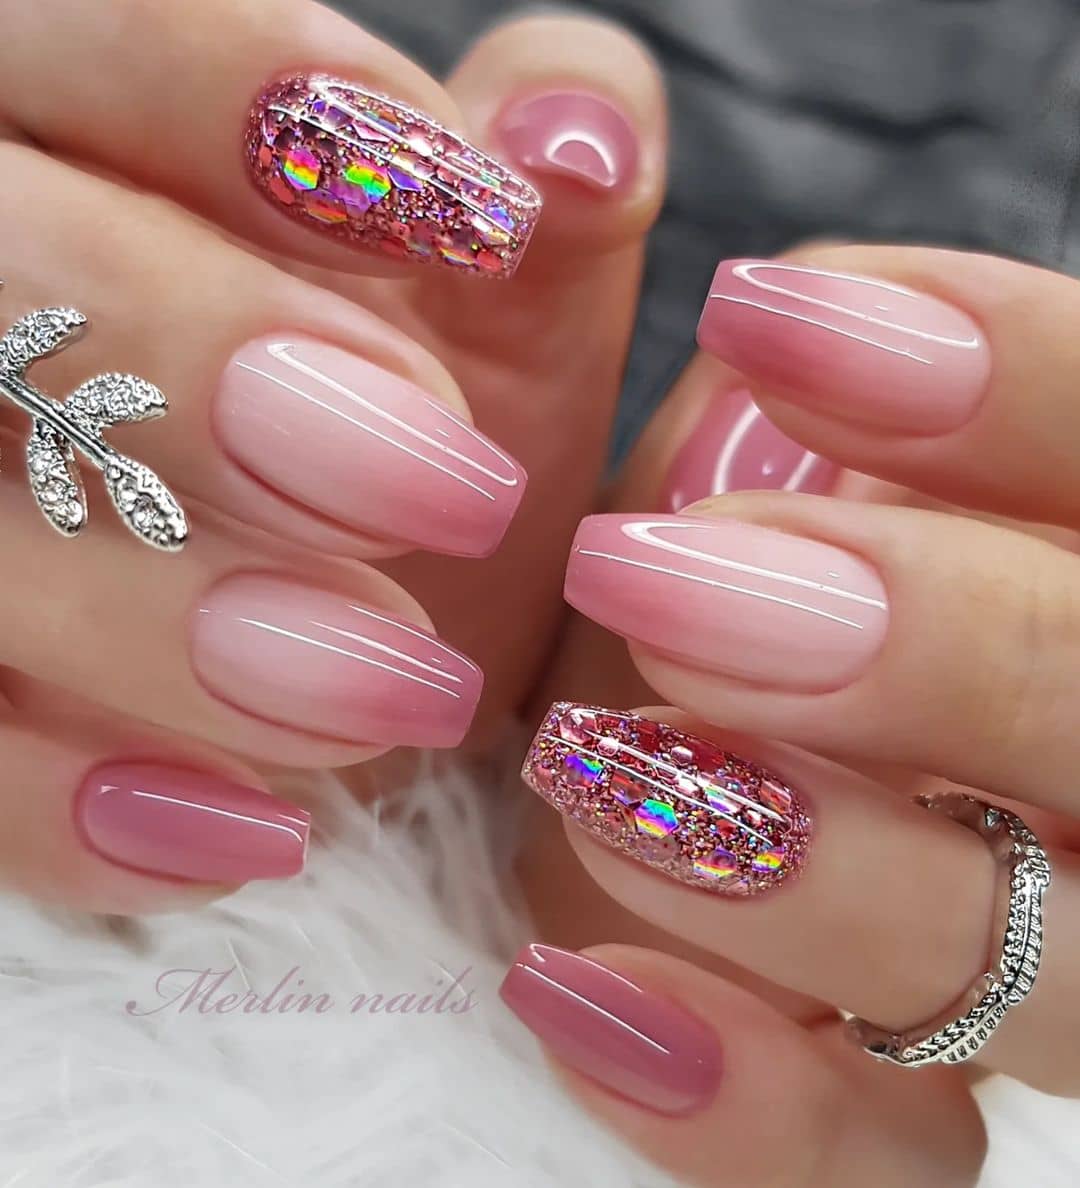 Over 100 Bright Summer Nail Art Designs That Will Be So Trendy images 111